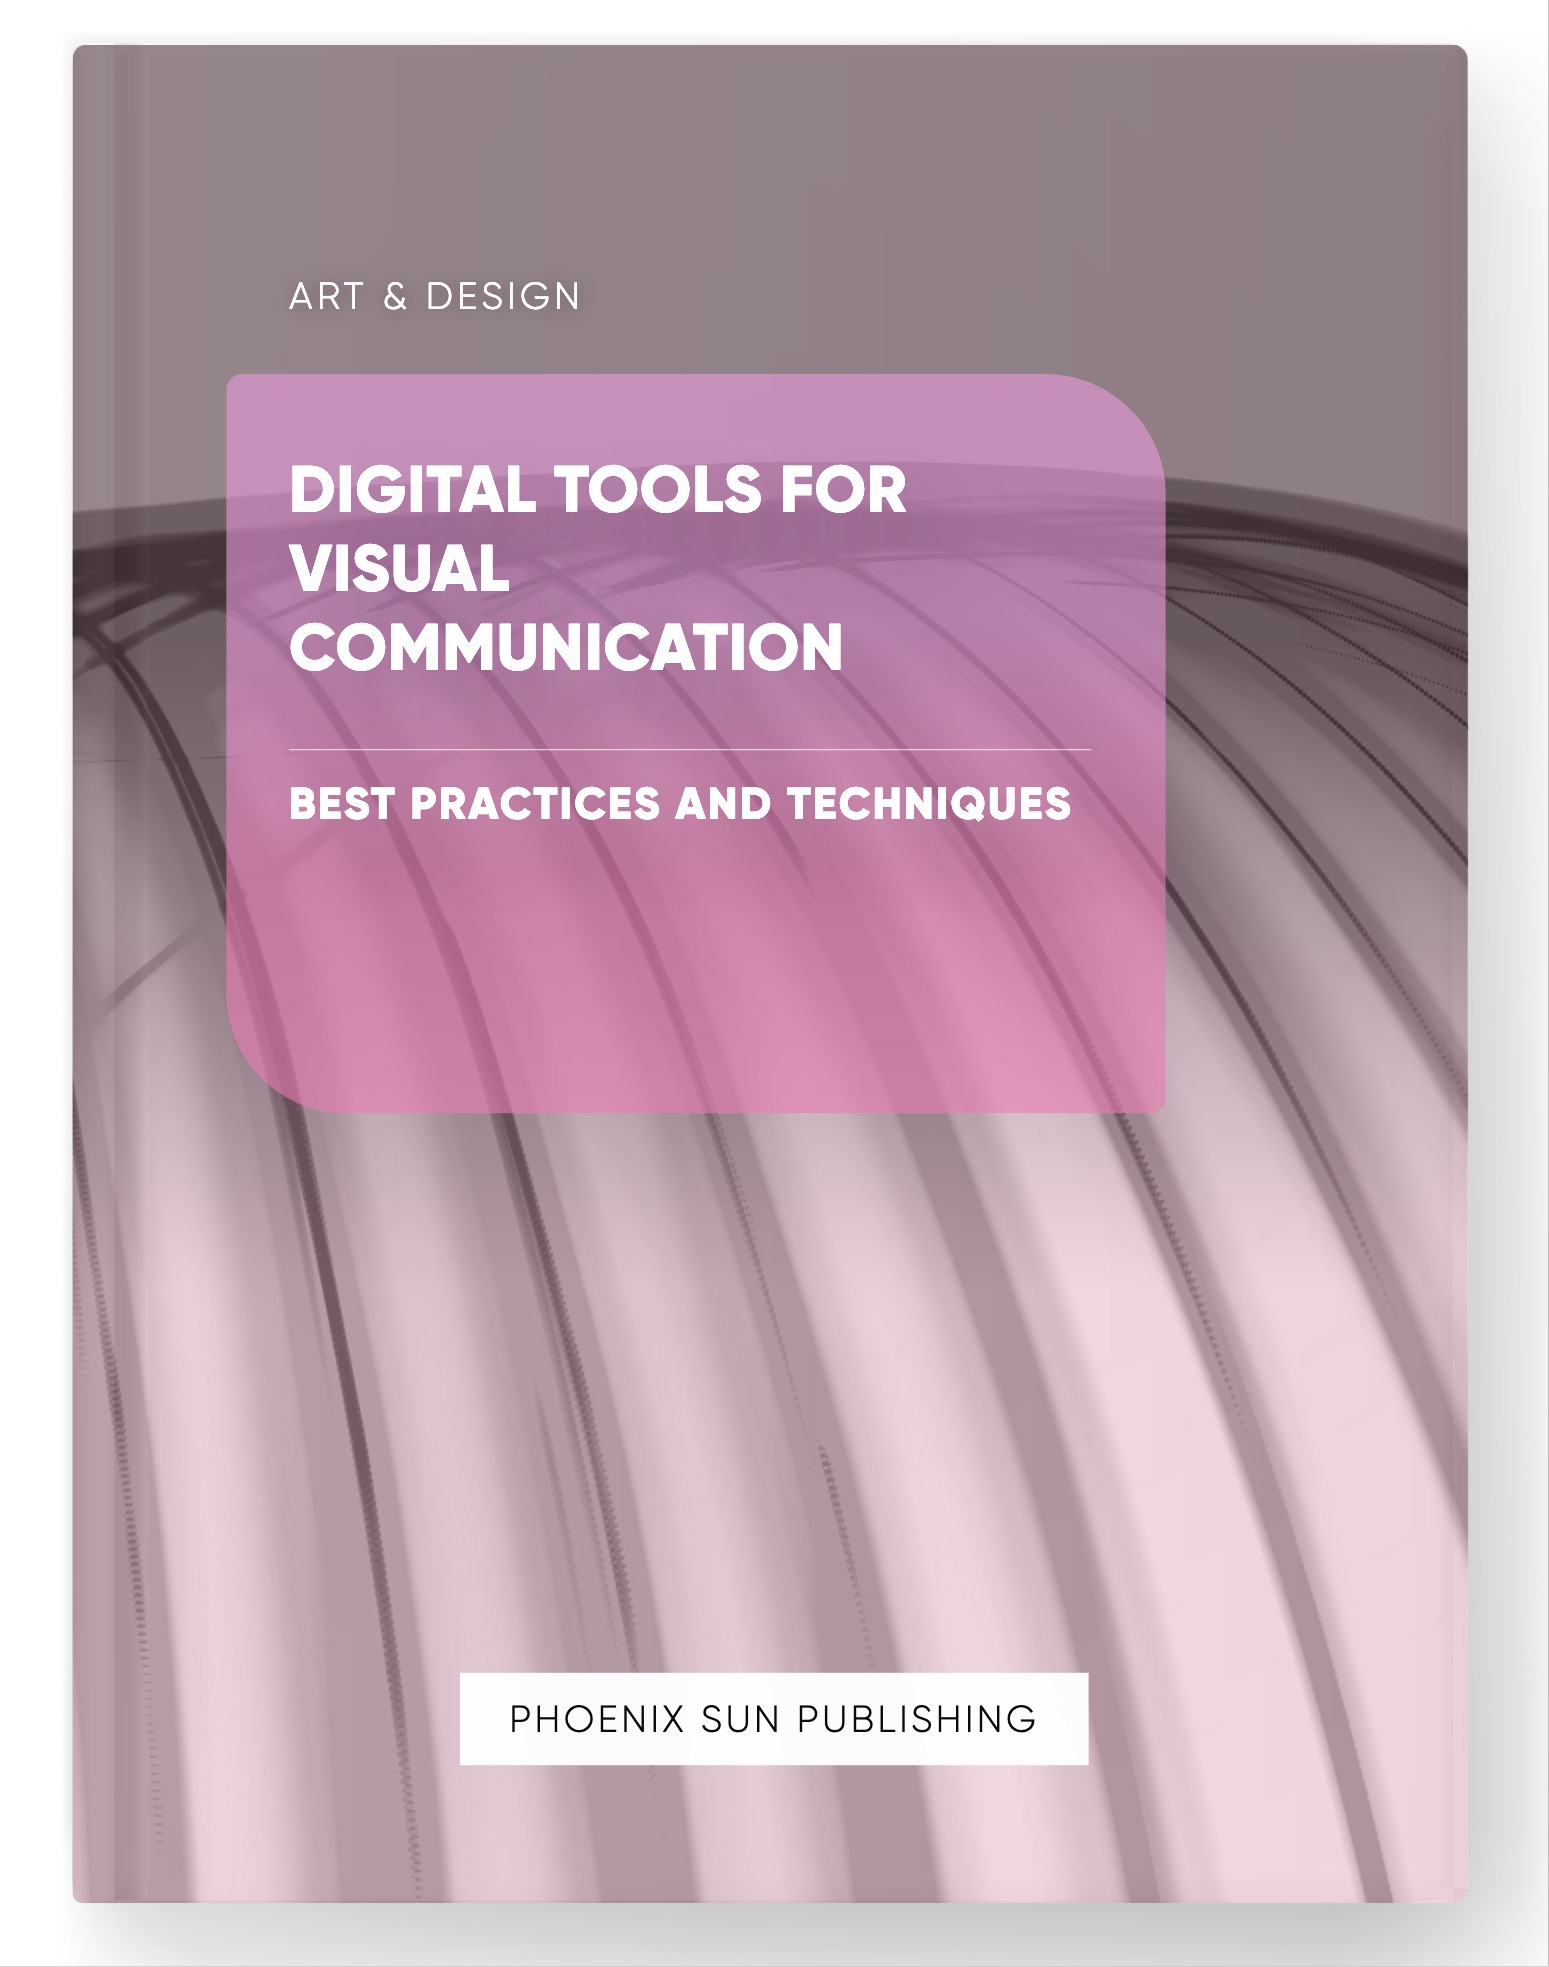 Digital Tools for Visual Communication – Best Practices and Techniques